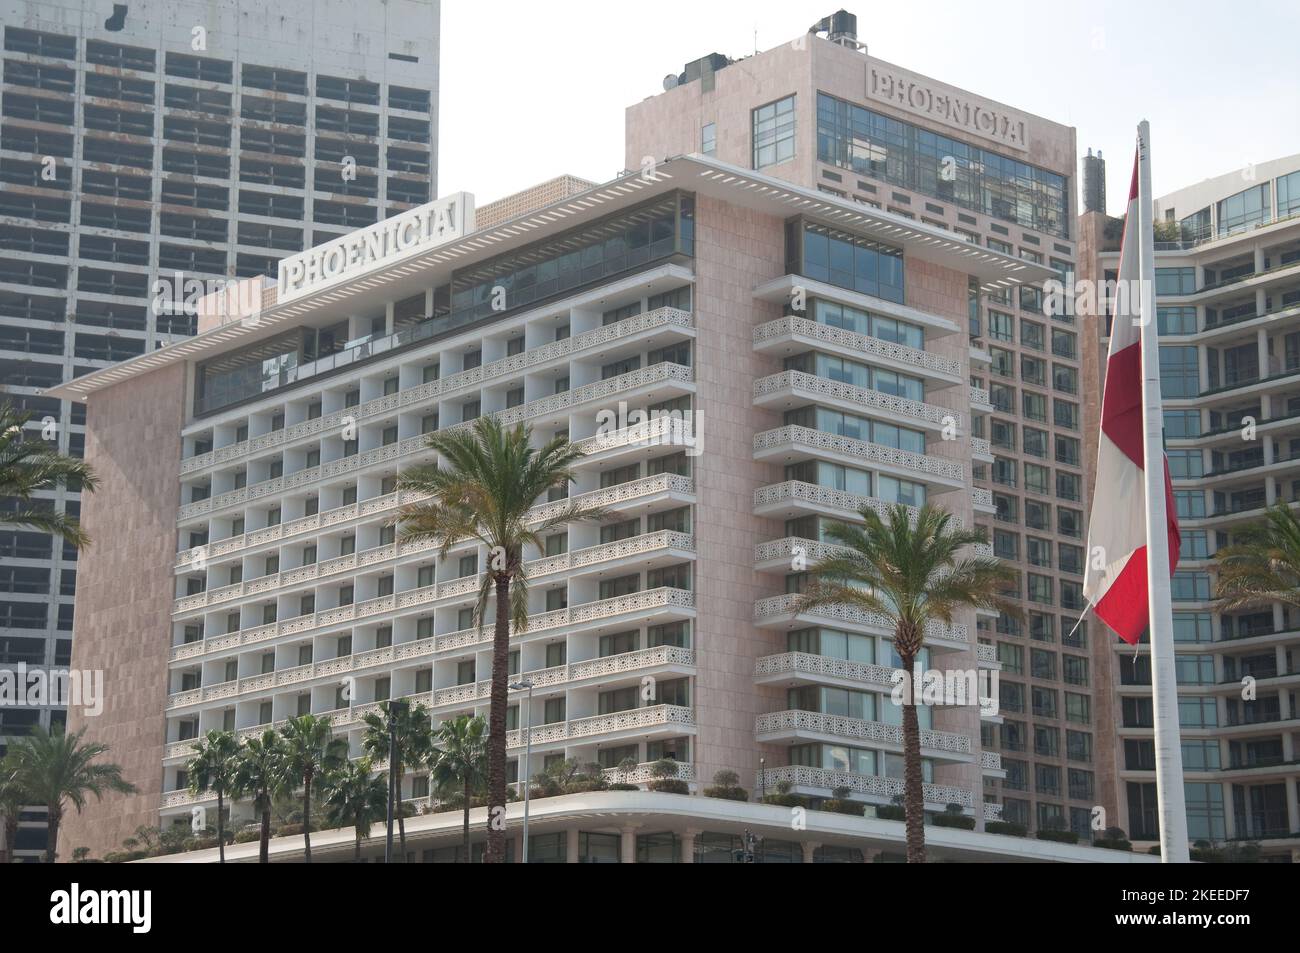 Phoenicia Hotel,  Marina, Beirut, Lebanon, Middle East.  The Phoenician Empire extended along this coast some centuries ago. Stock Photo